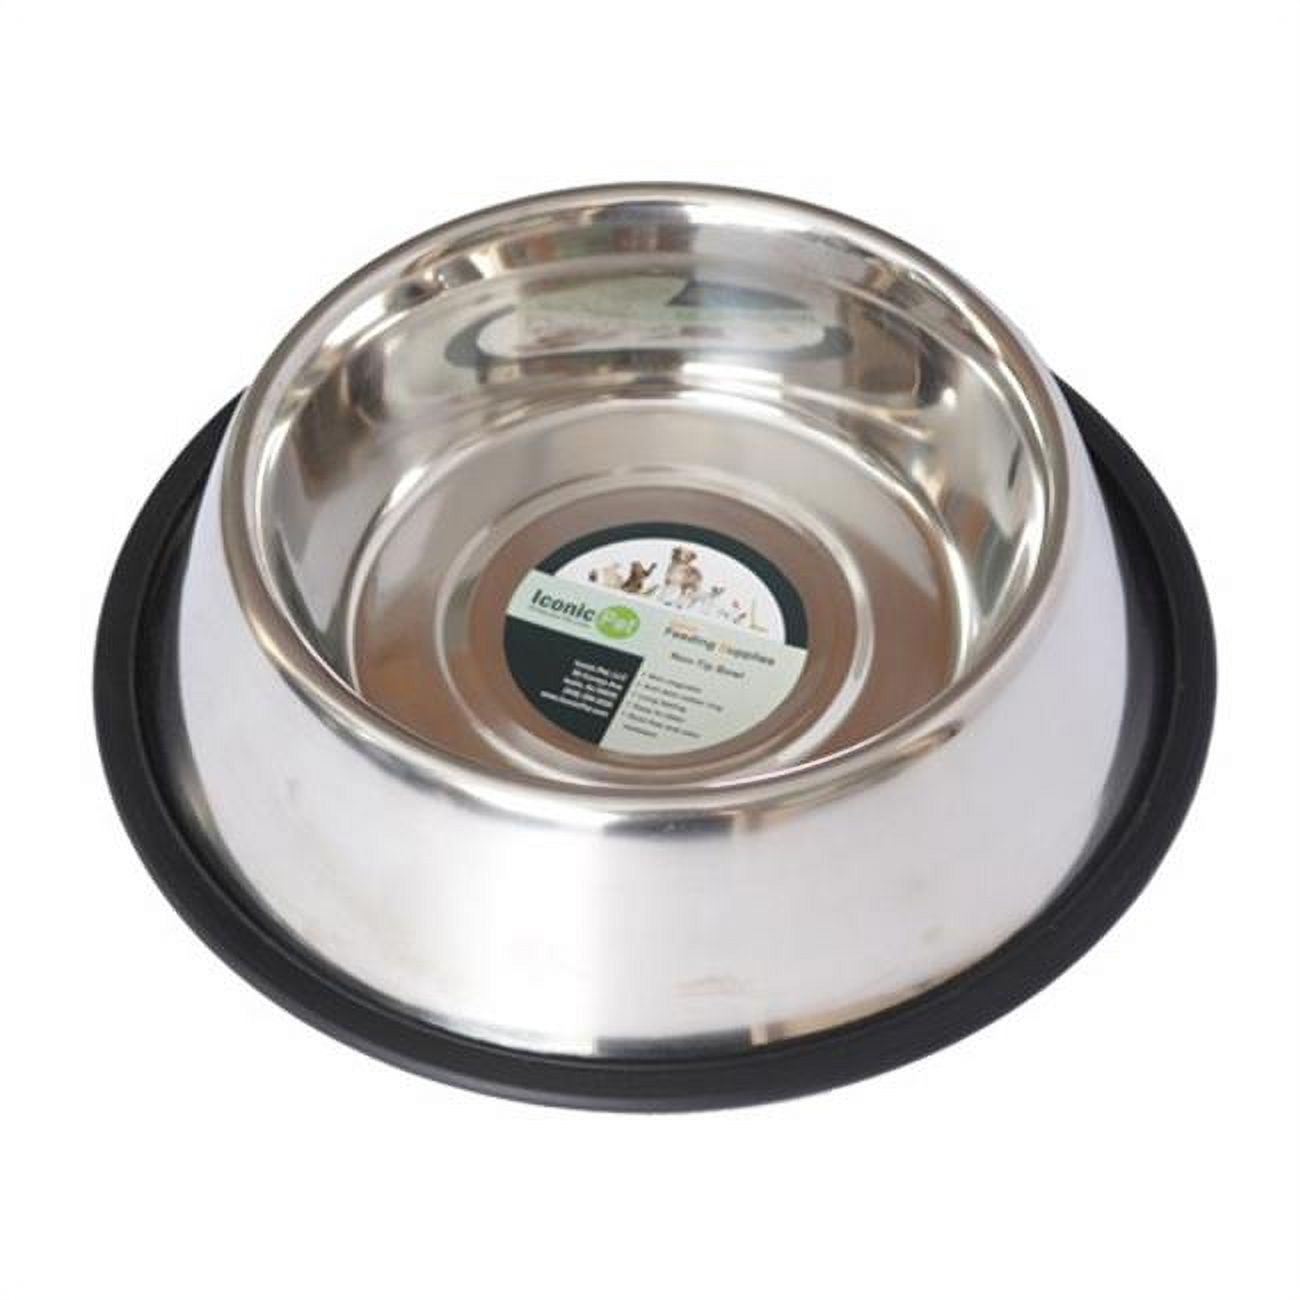 Picture of Iconic Pet 92014 96 oz Stainless Steel Non-Skid Pet Bowl for Dog or Cat